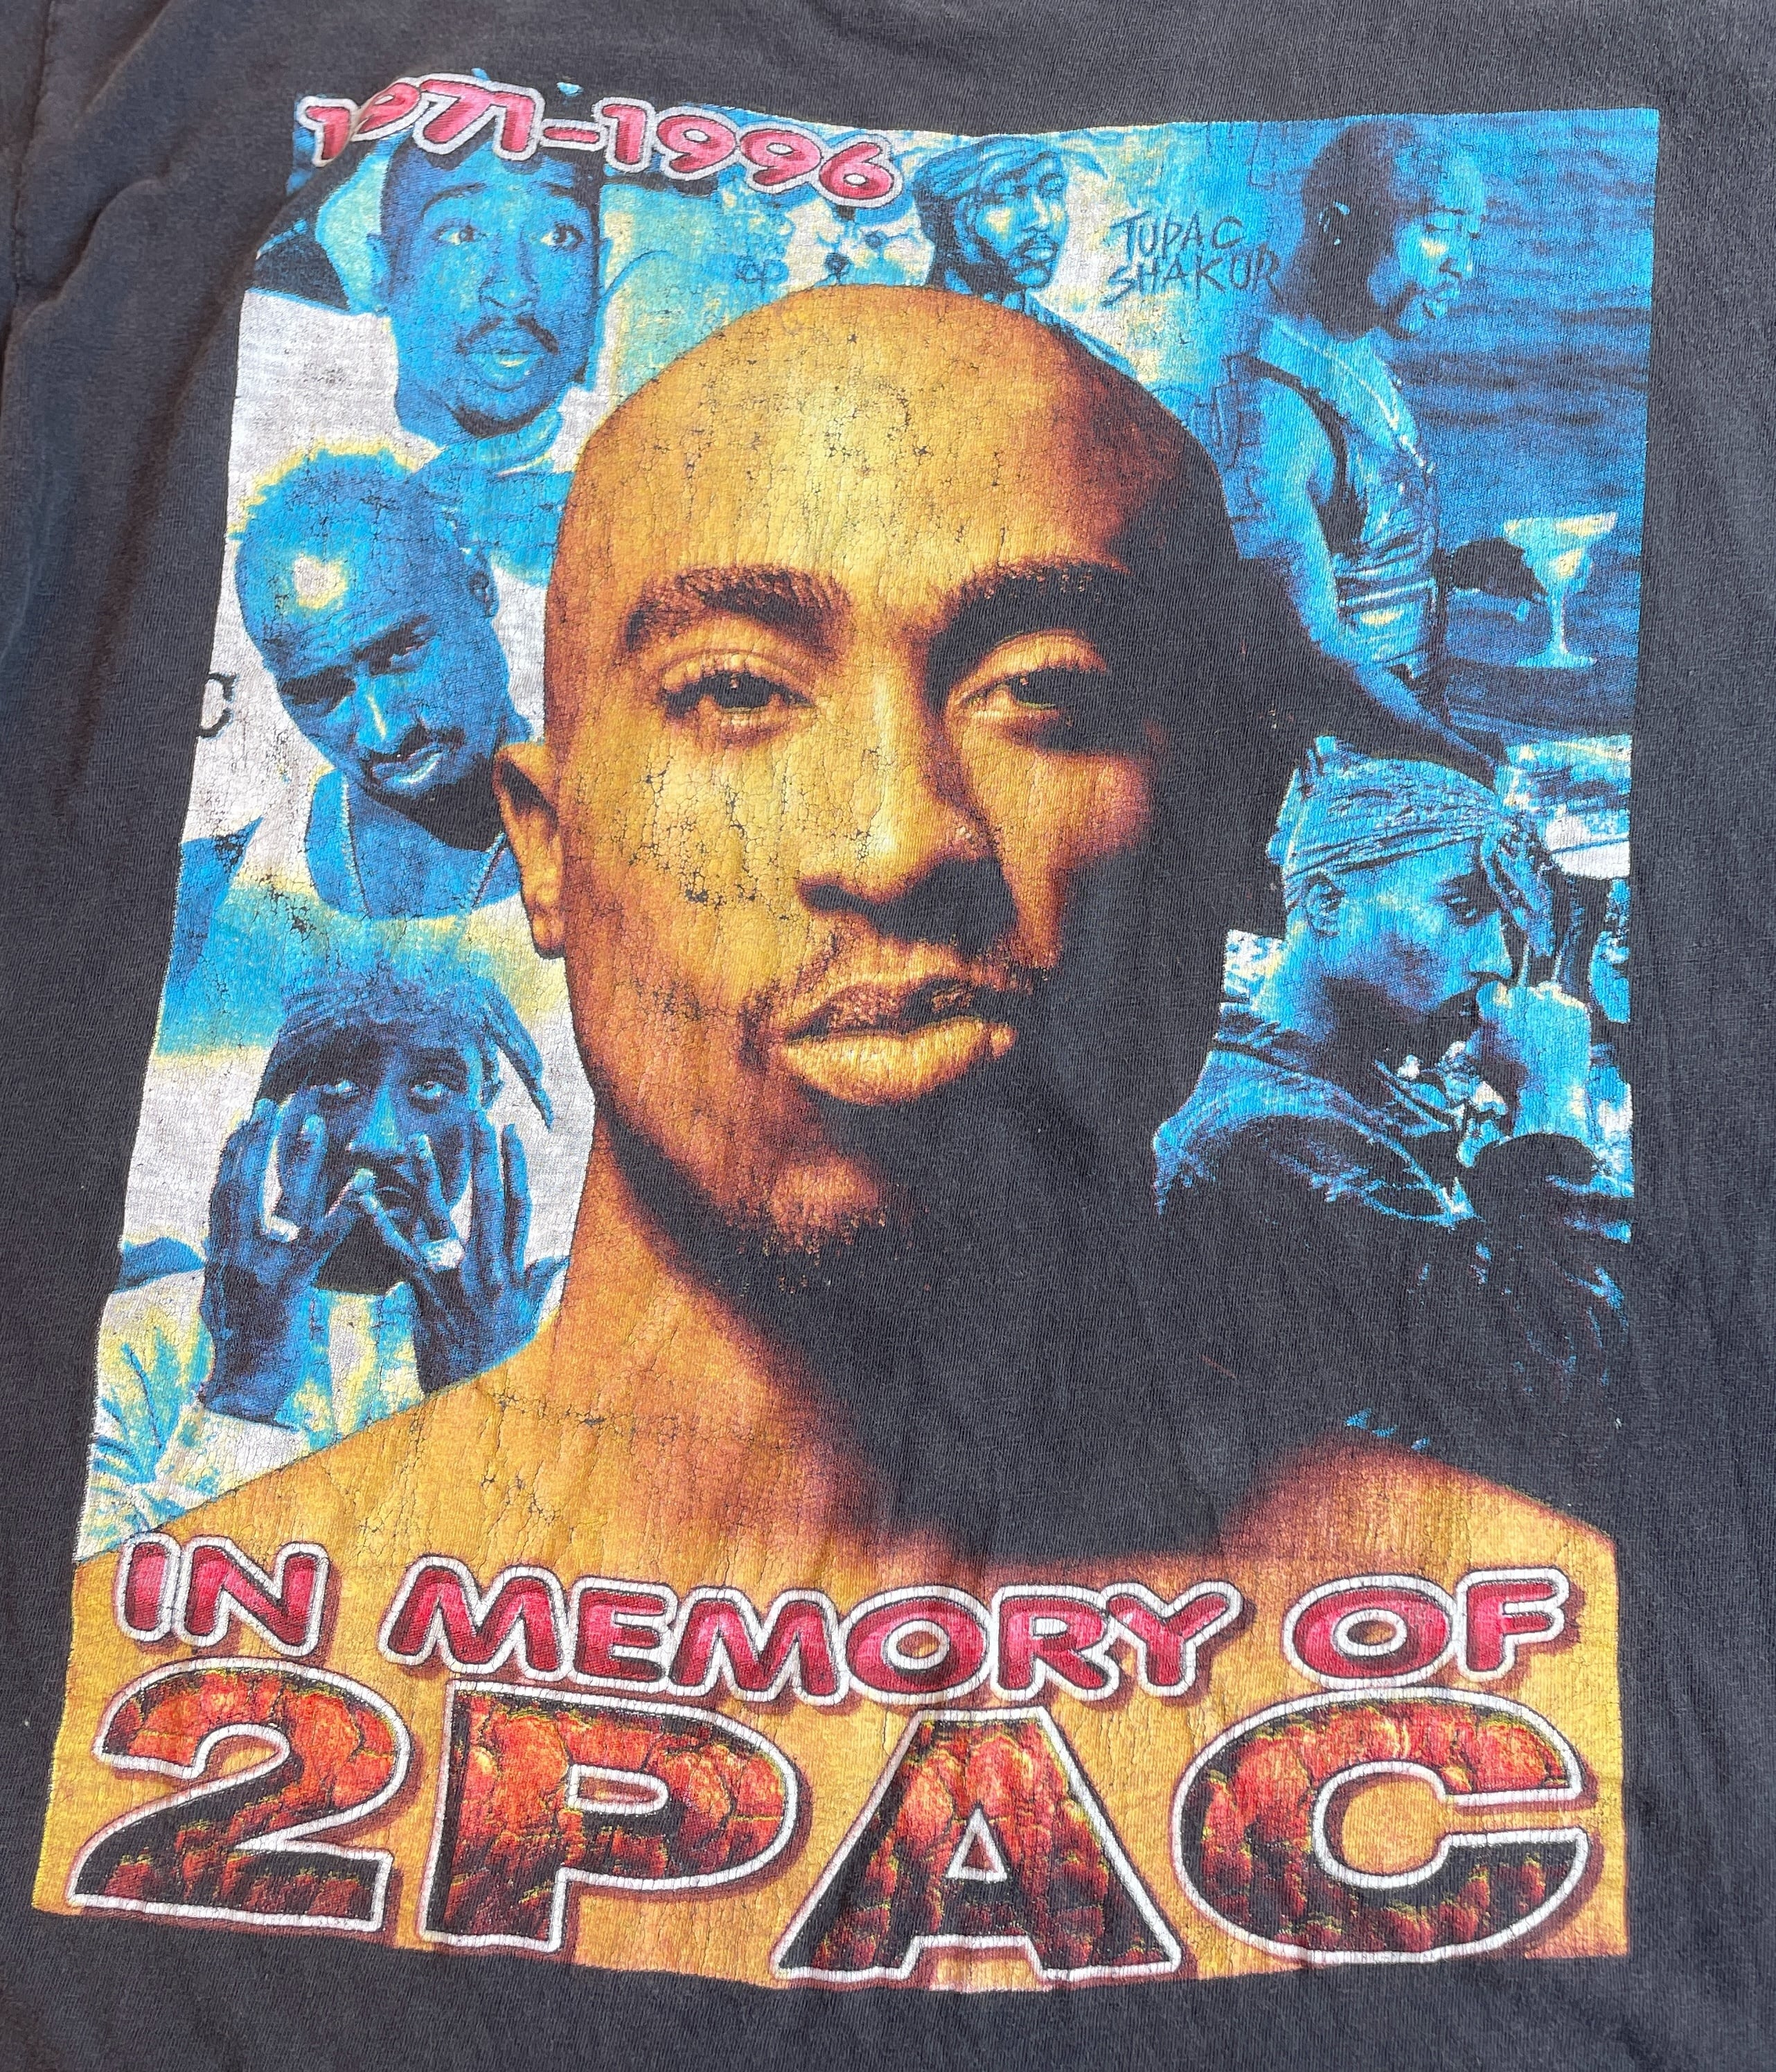 VINTAGE 90s RAP T-SHIRT -Tupac- | BEGGARS BANQUET公式通販サイト　古着・ヴィンテージ